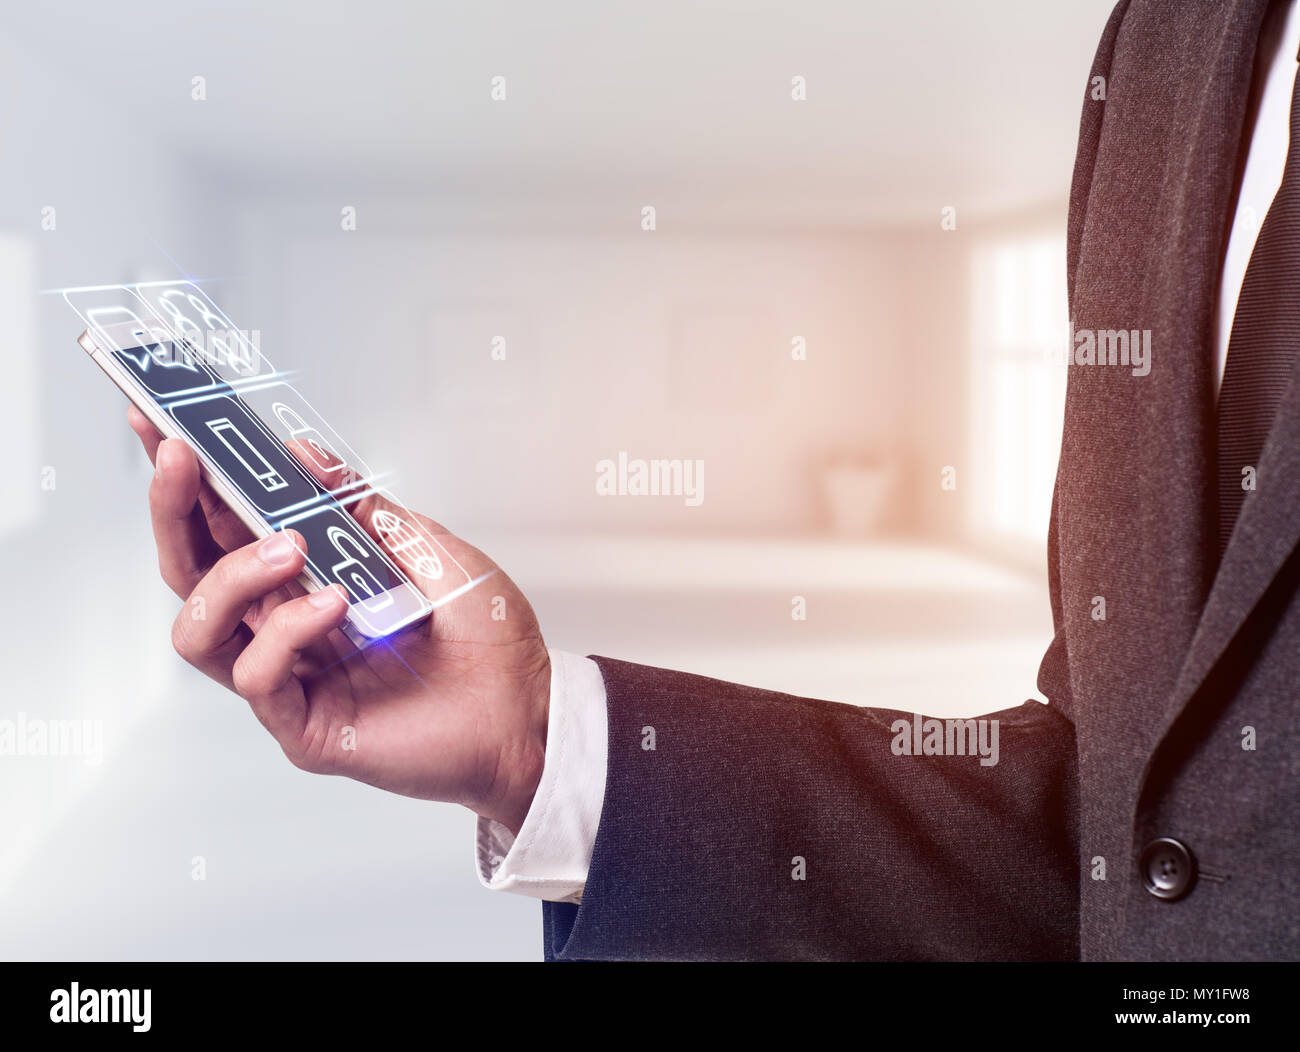 Businessman holding smart phone with media icons. Stock Photo